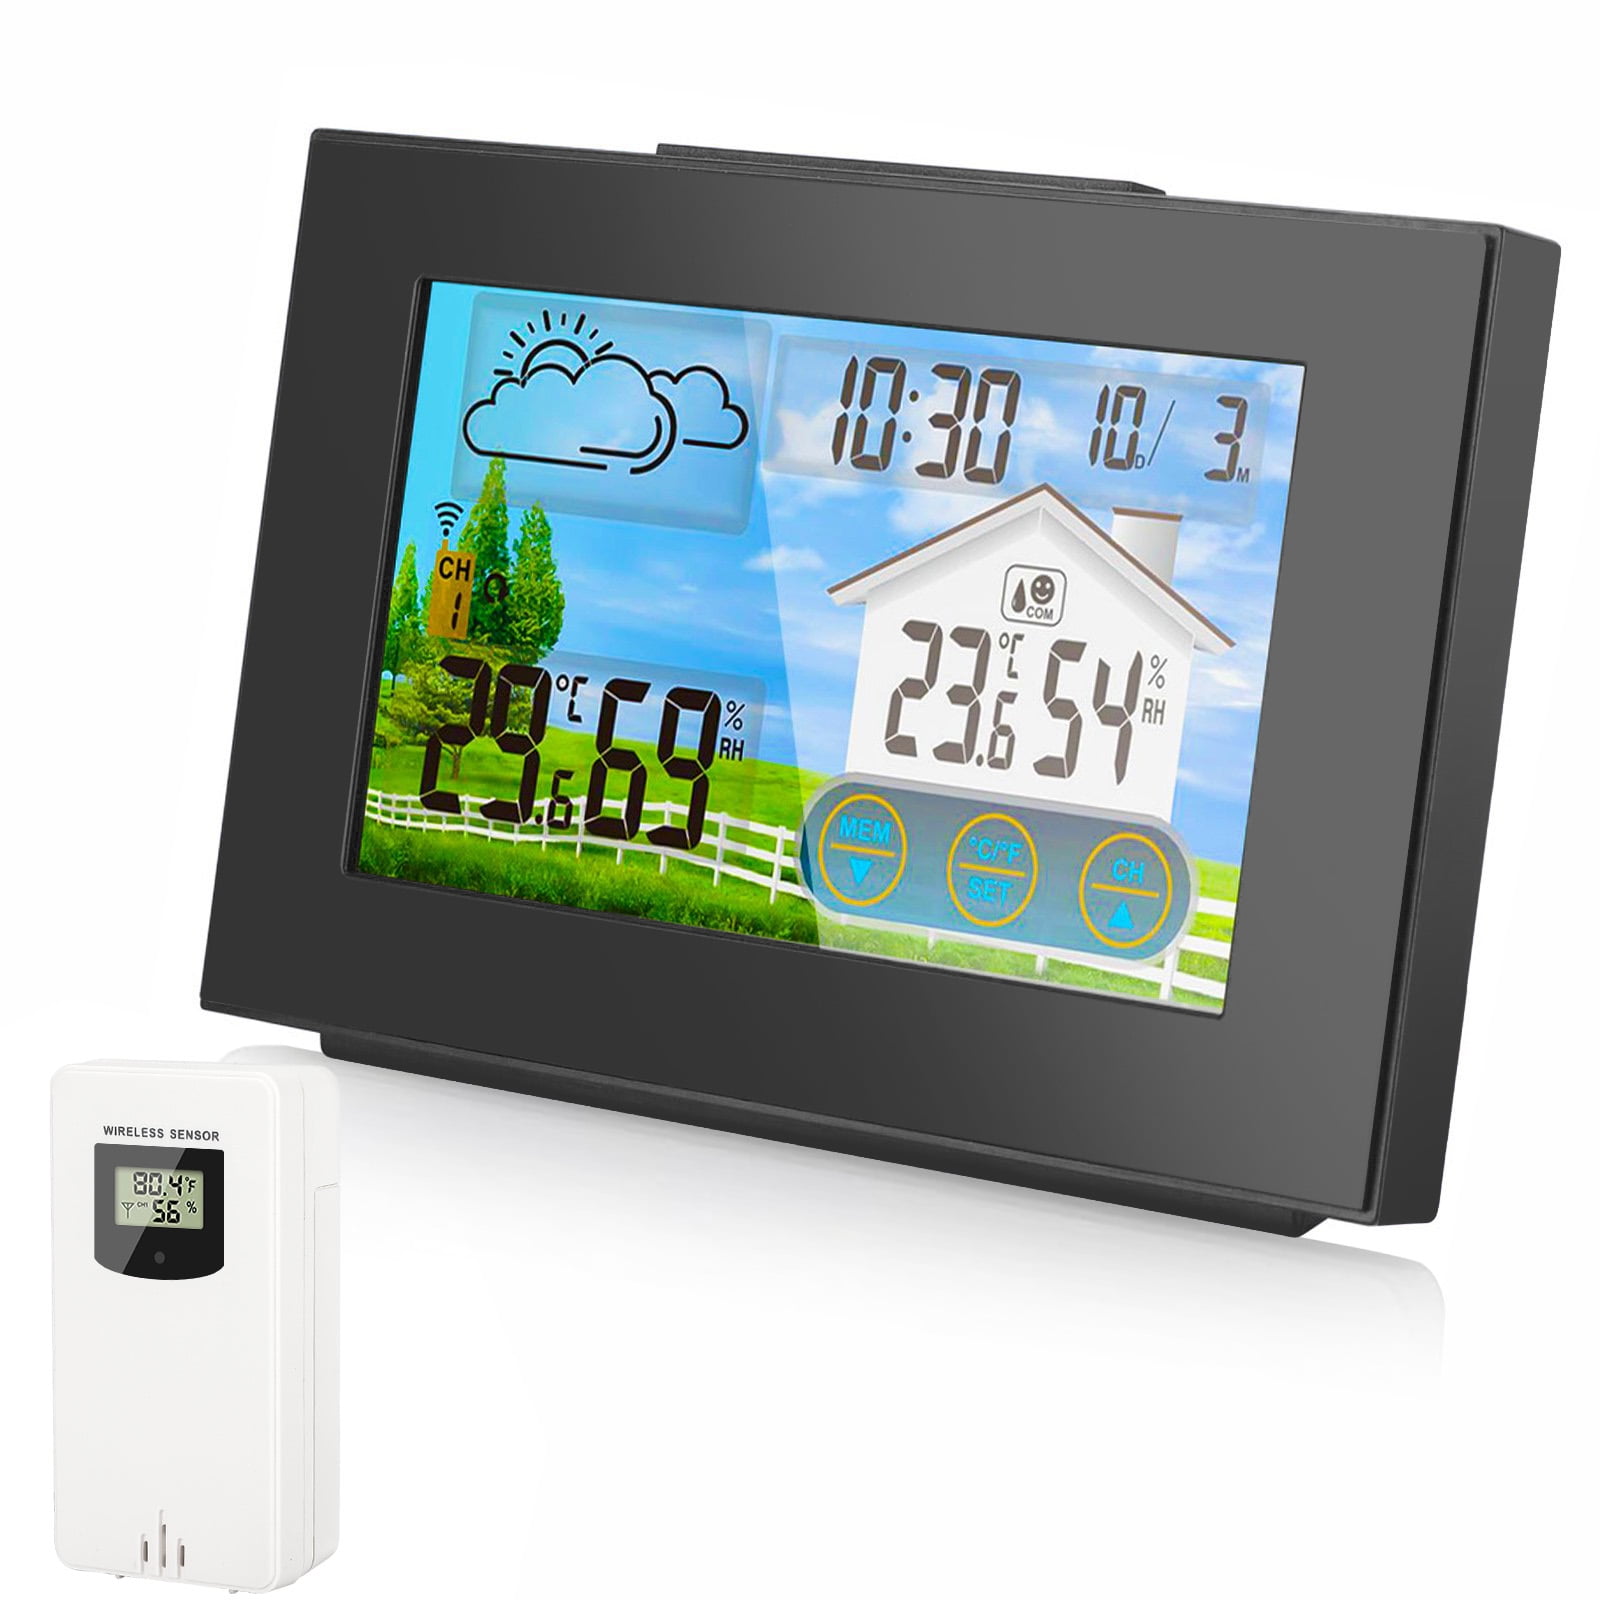 Details about   Weather Station Alarm Clock Thermometer Wireless Temperature Humidity Meter US 